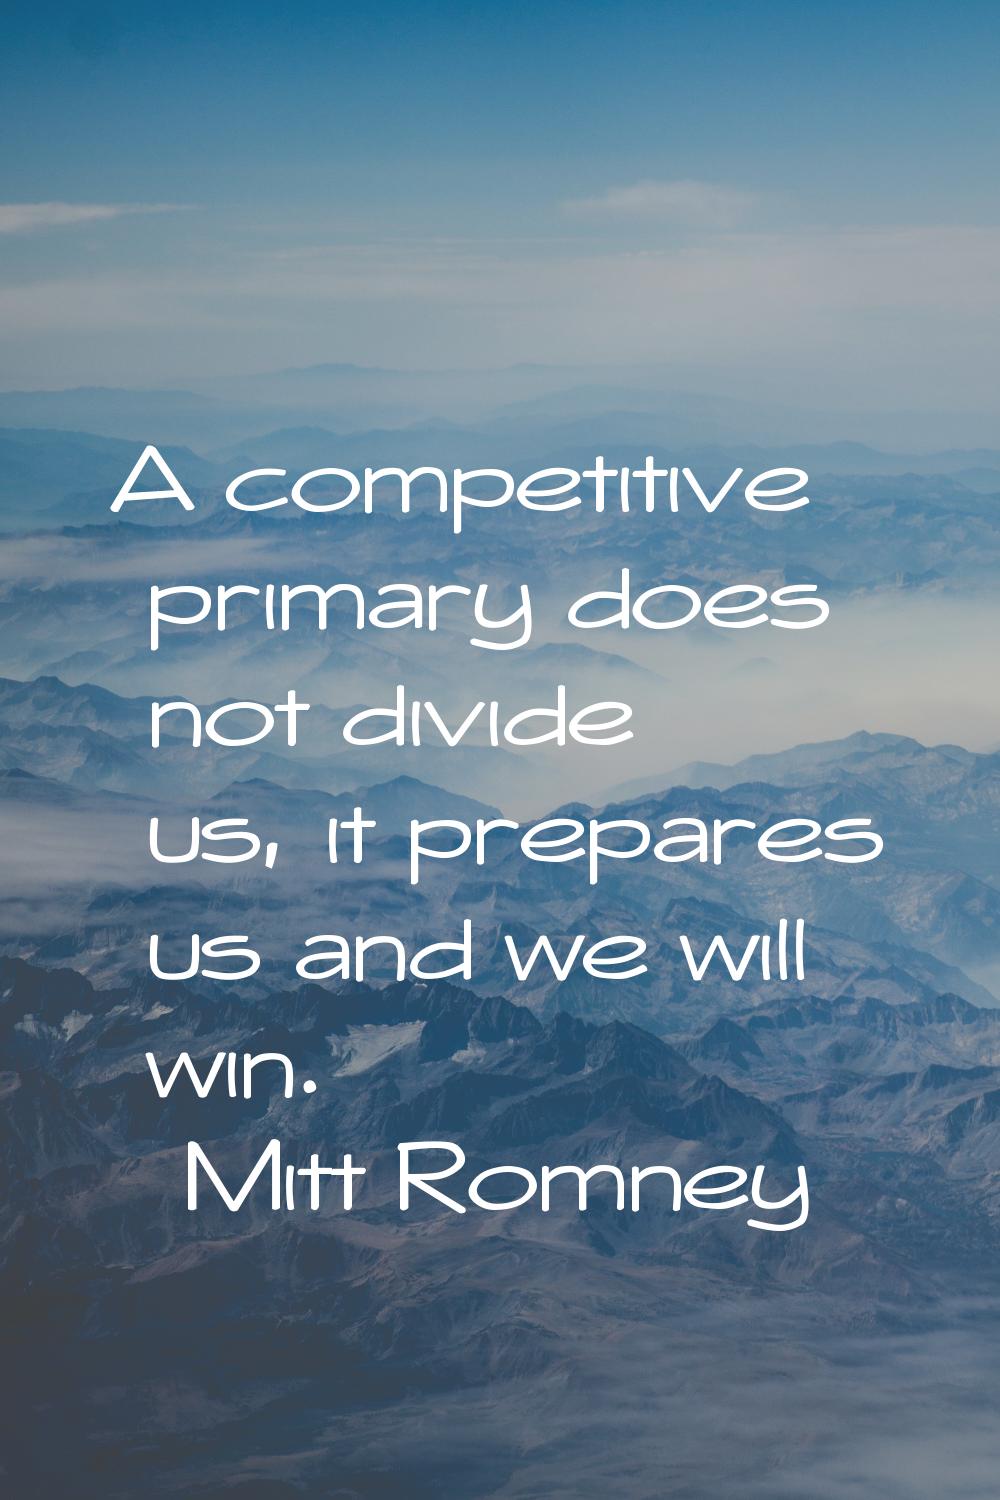 A competitive primary does not divide us, it prepares us and we will win.